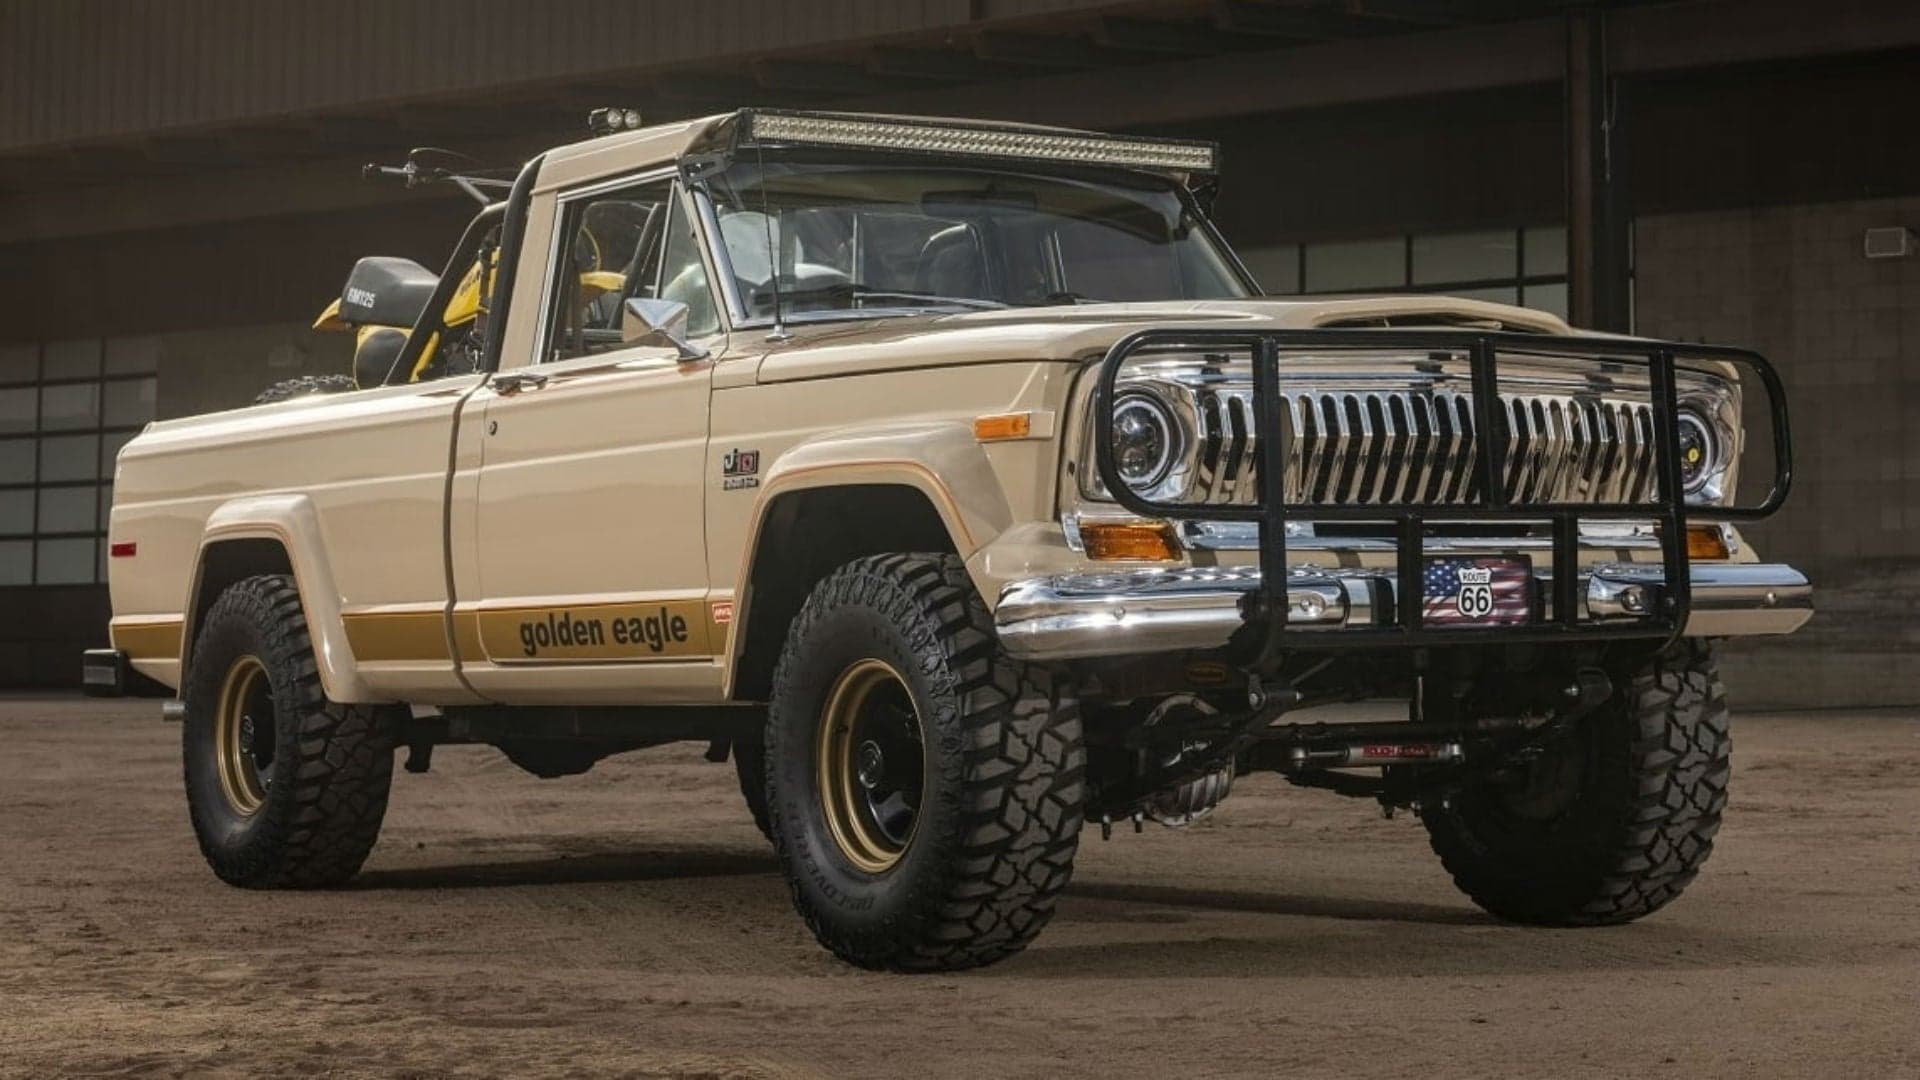 Restored 1978 Jeep J10 Golden Eagle Truck Is the Perfect Toy Hauler